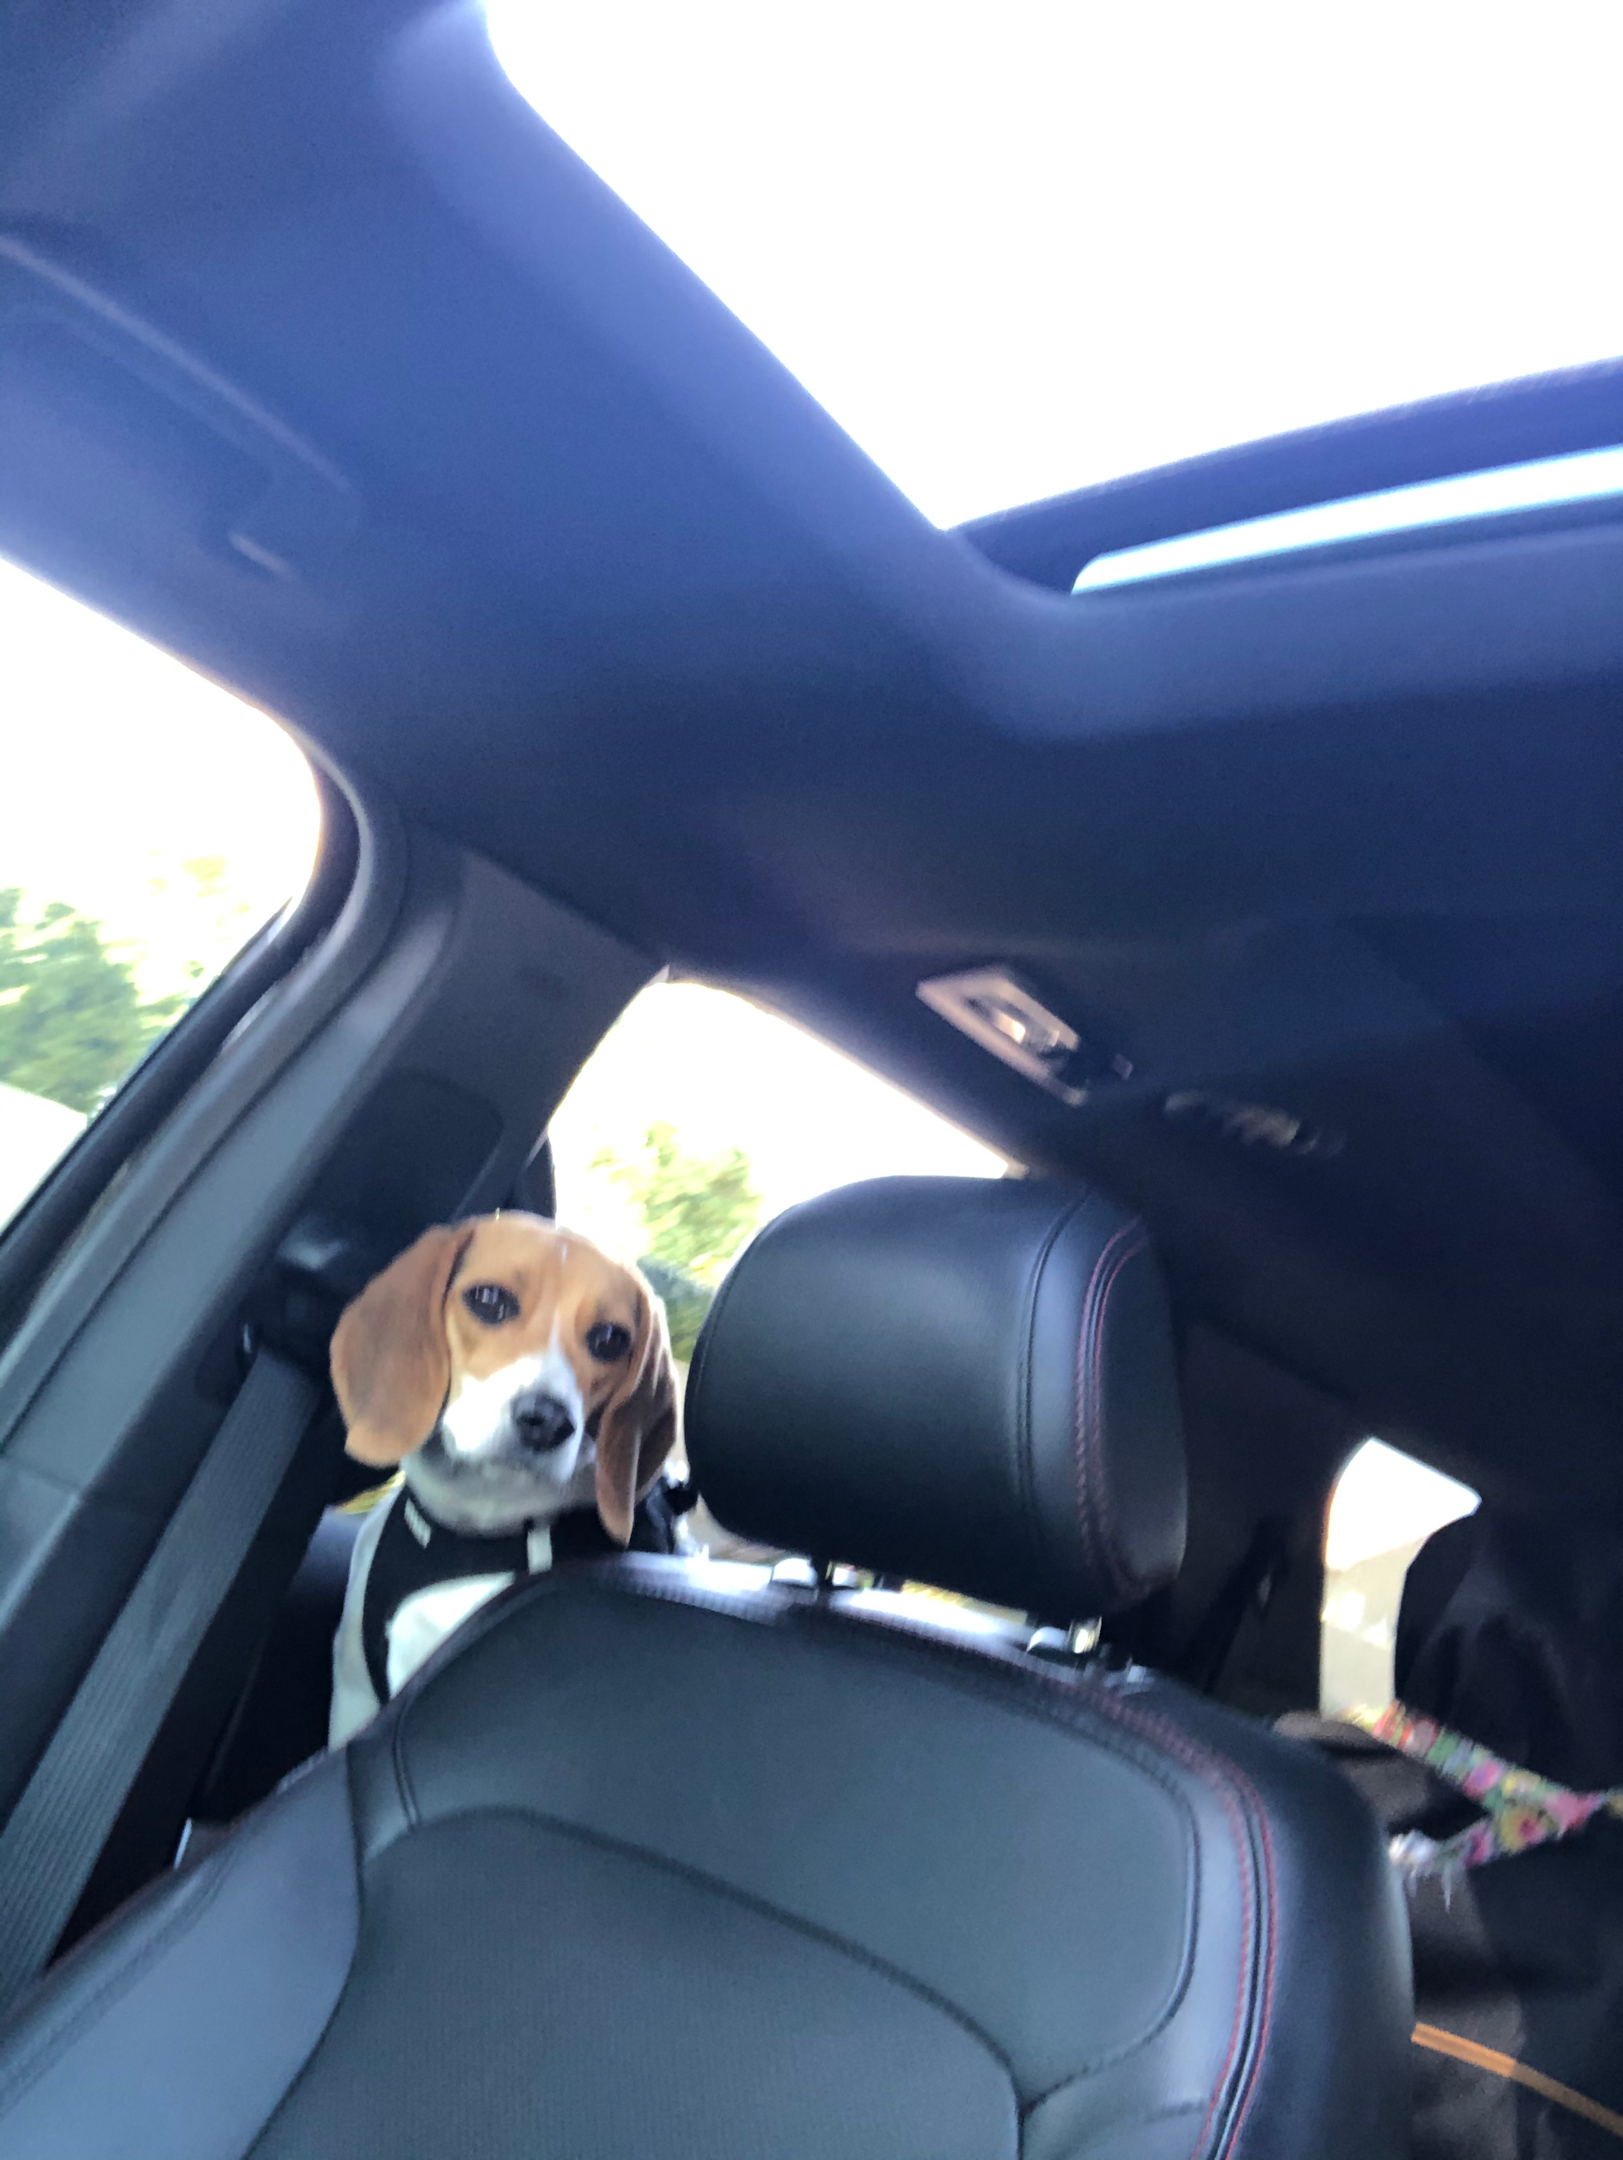 A beagle going to socialize with other dogs